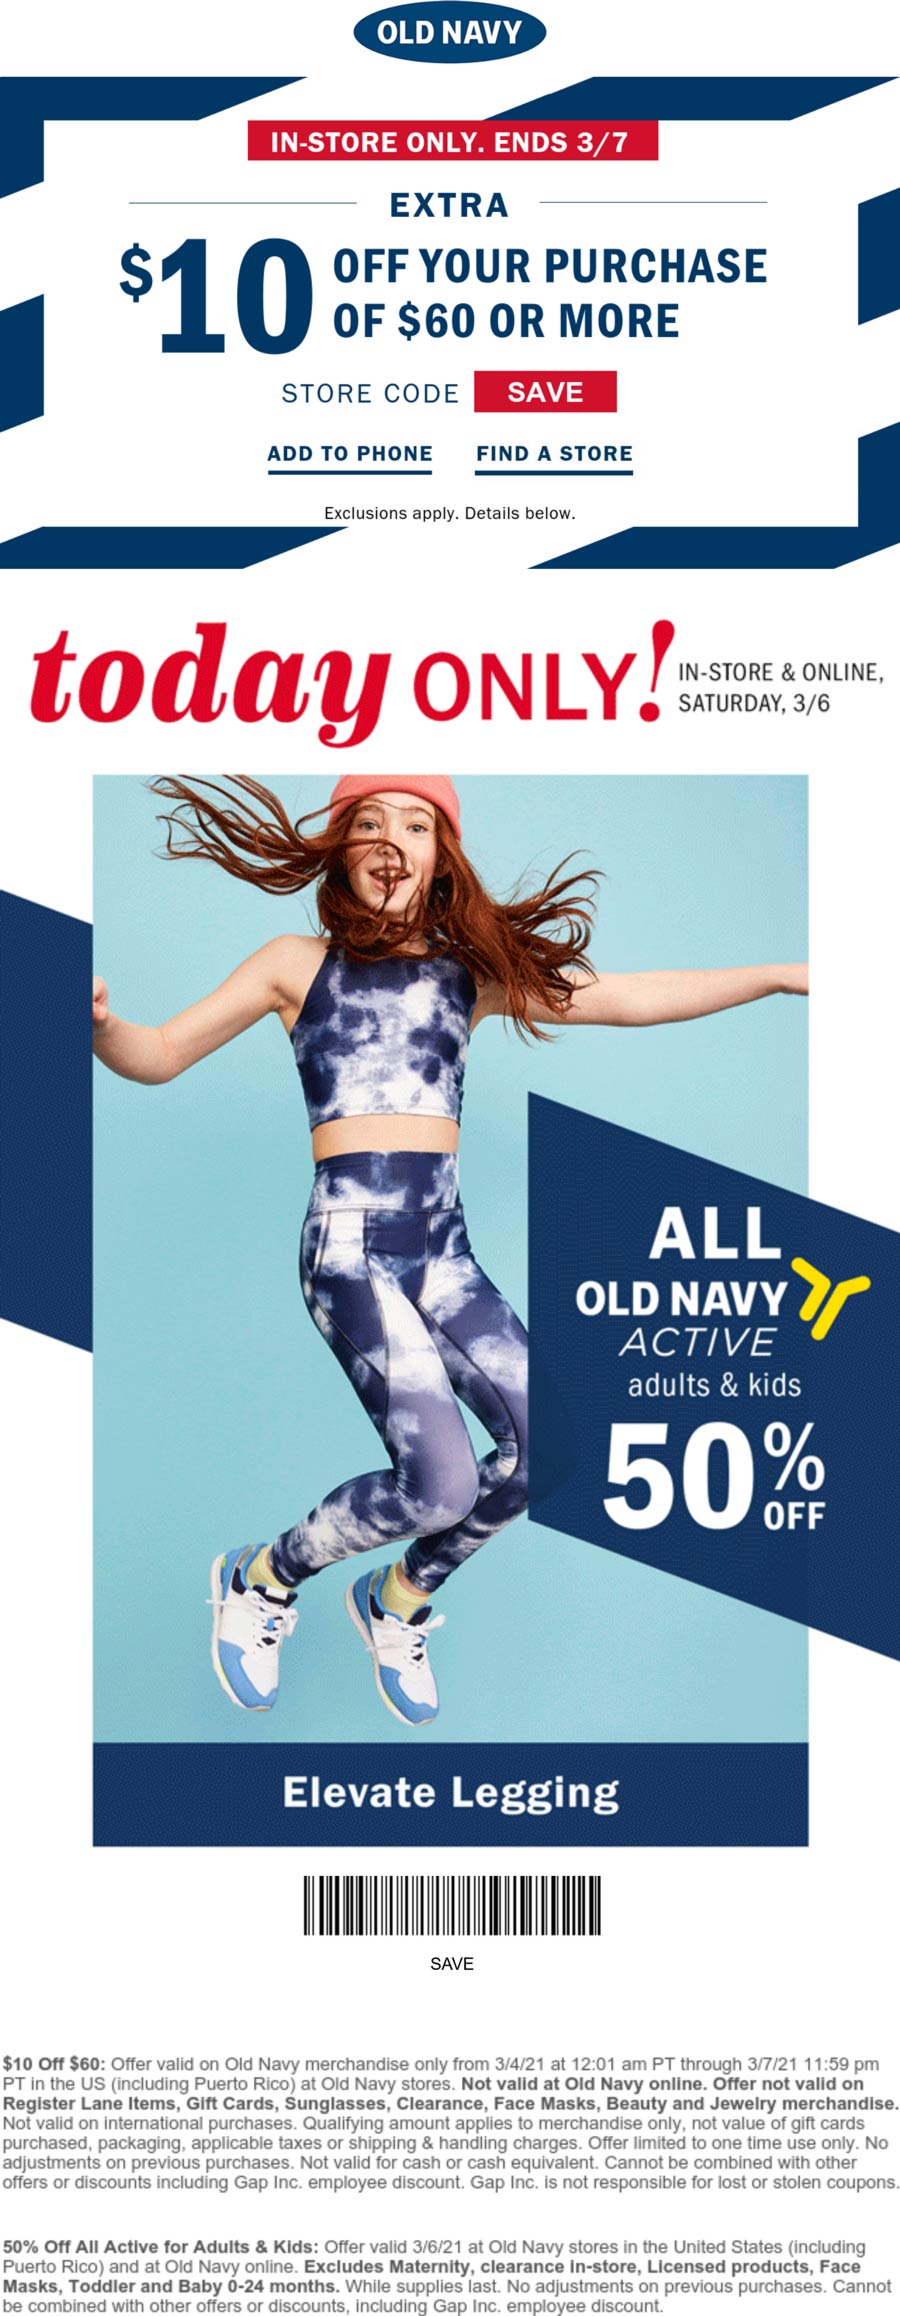 10 off 60 & more at Old Navy oldnavy The Coupons App®